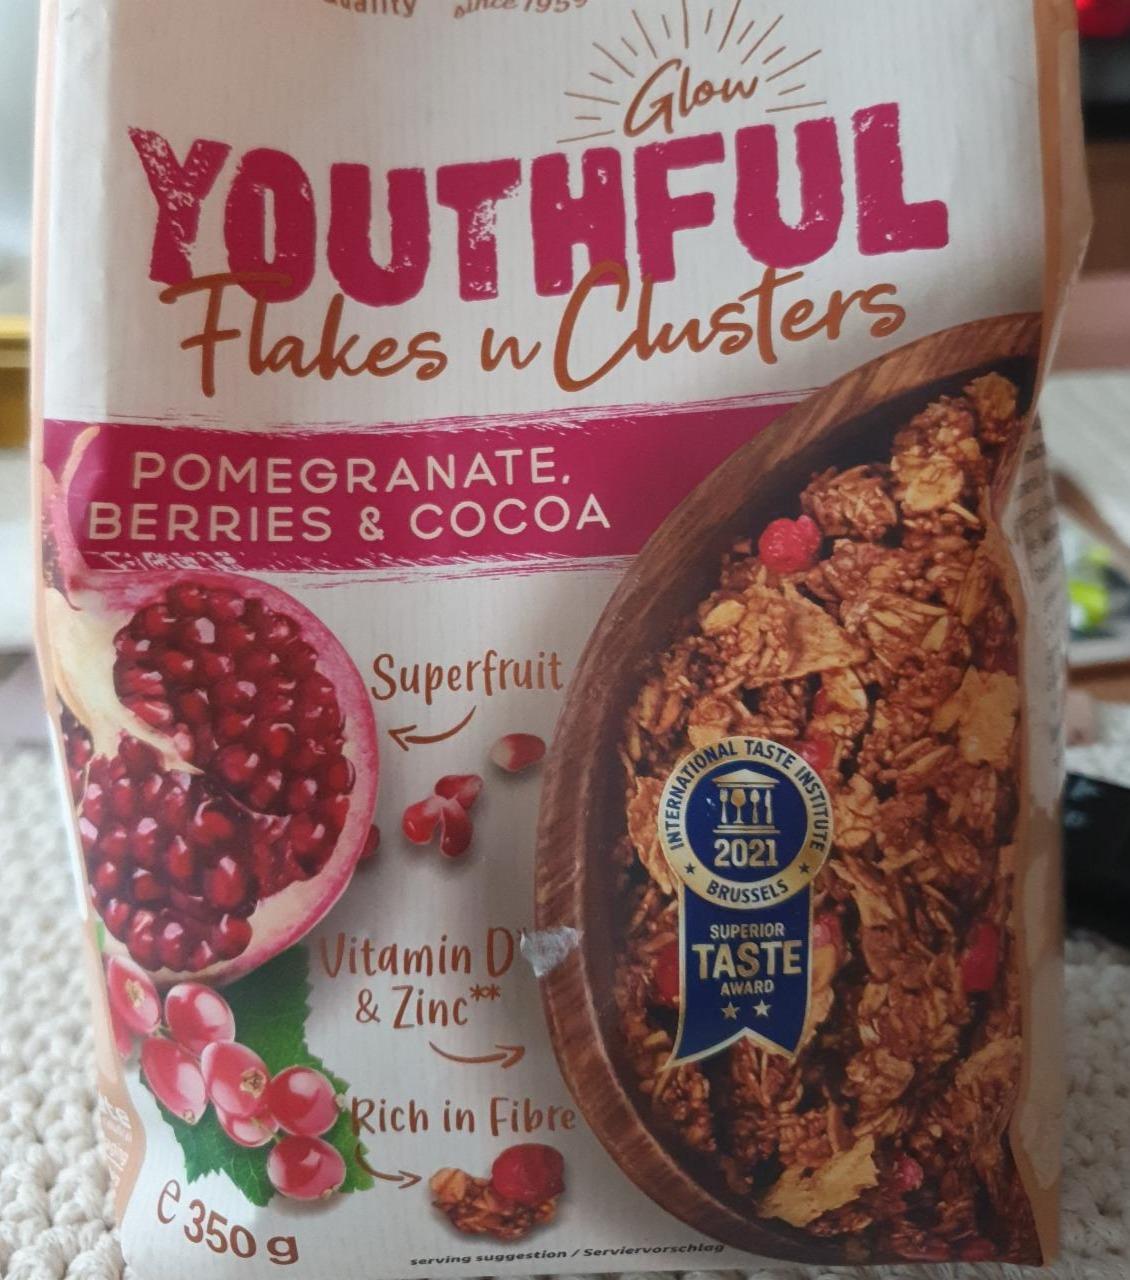 Fotografie - Youthful Flakes n Clusters Pomegranate Berries & Cocoa Familia